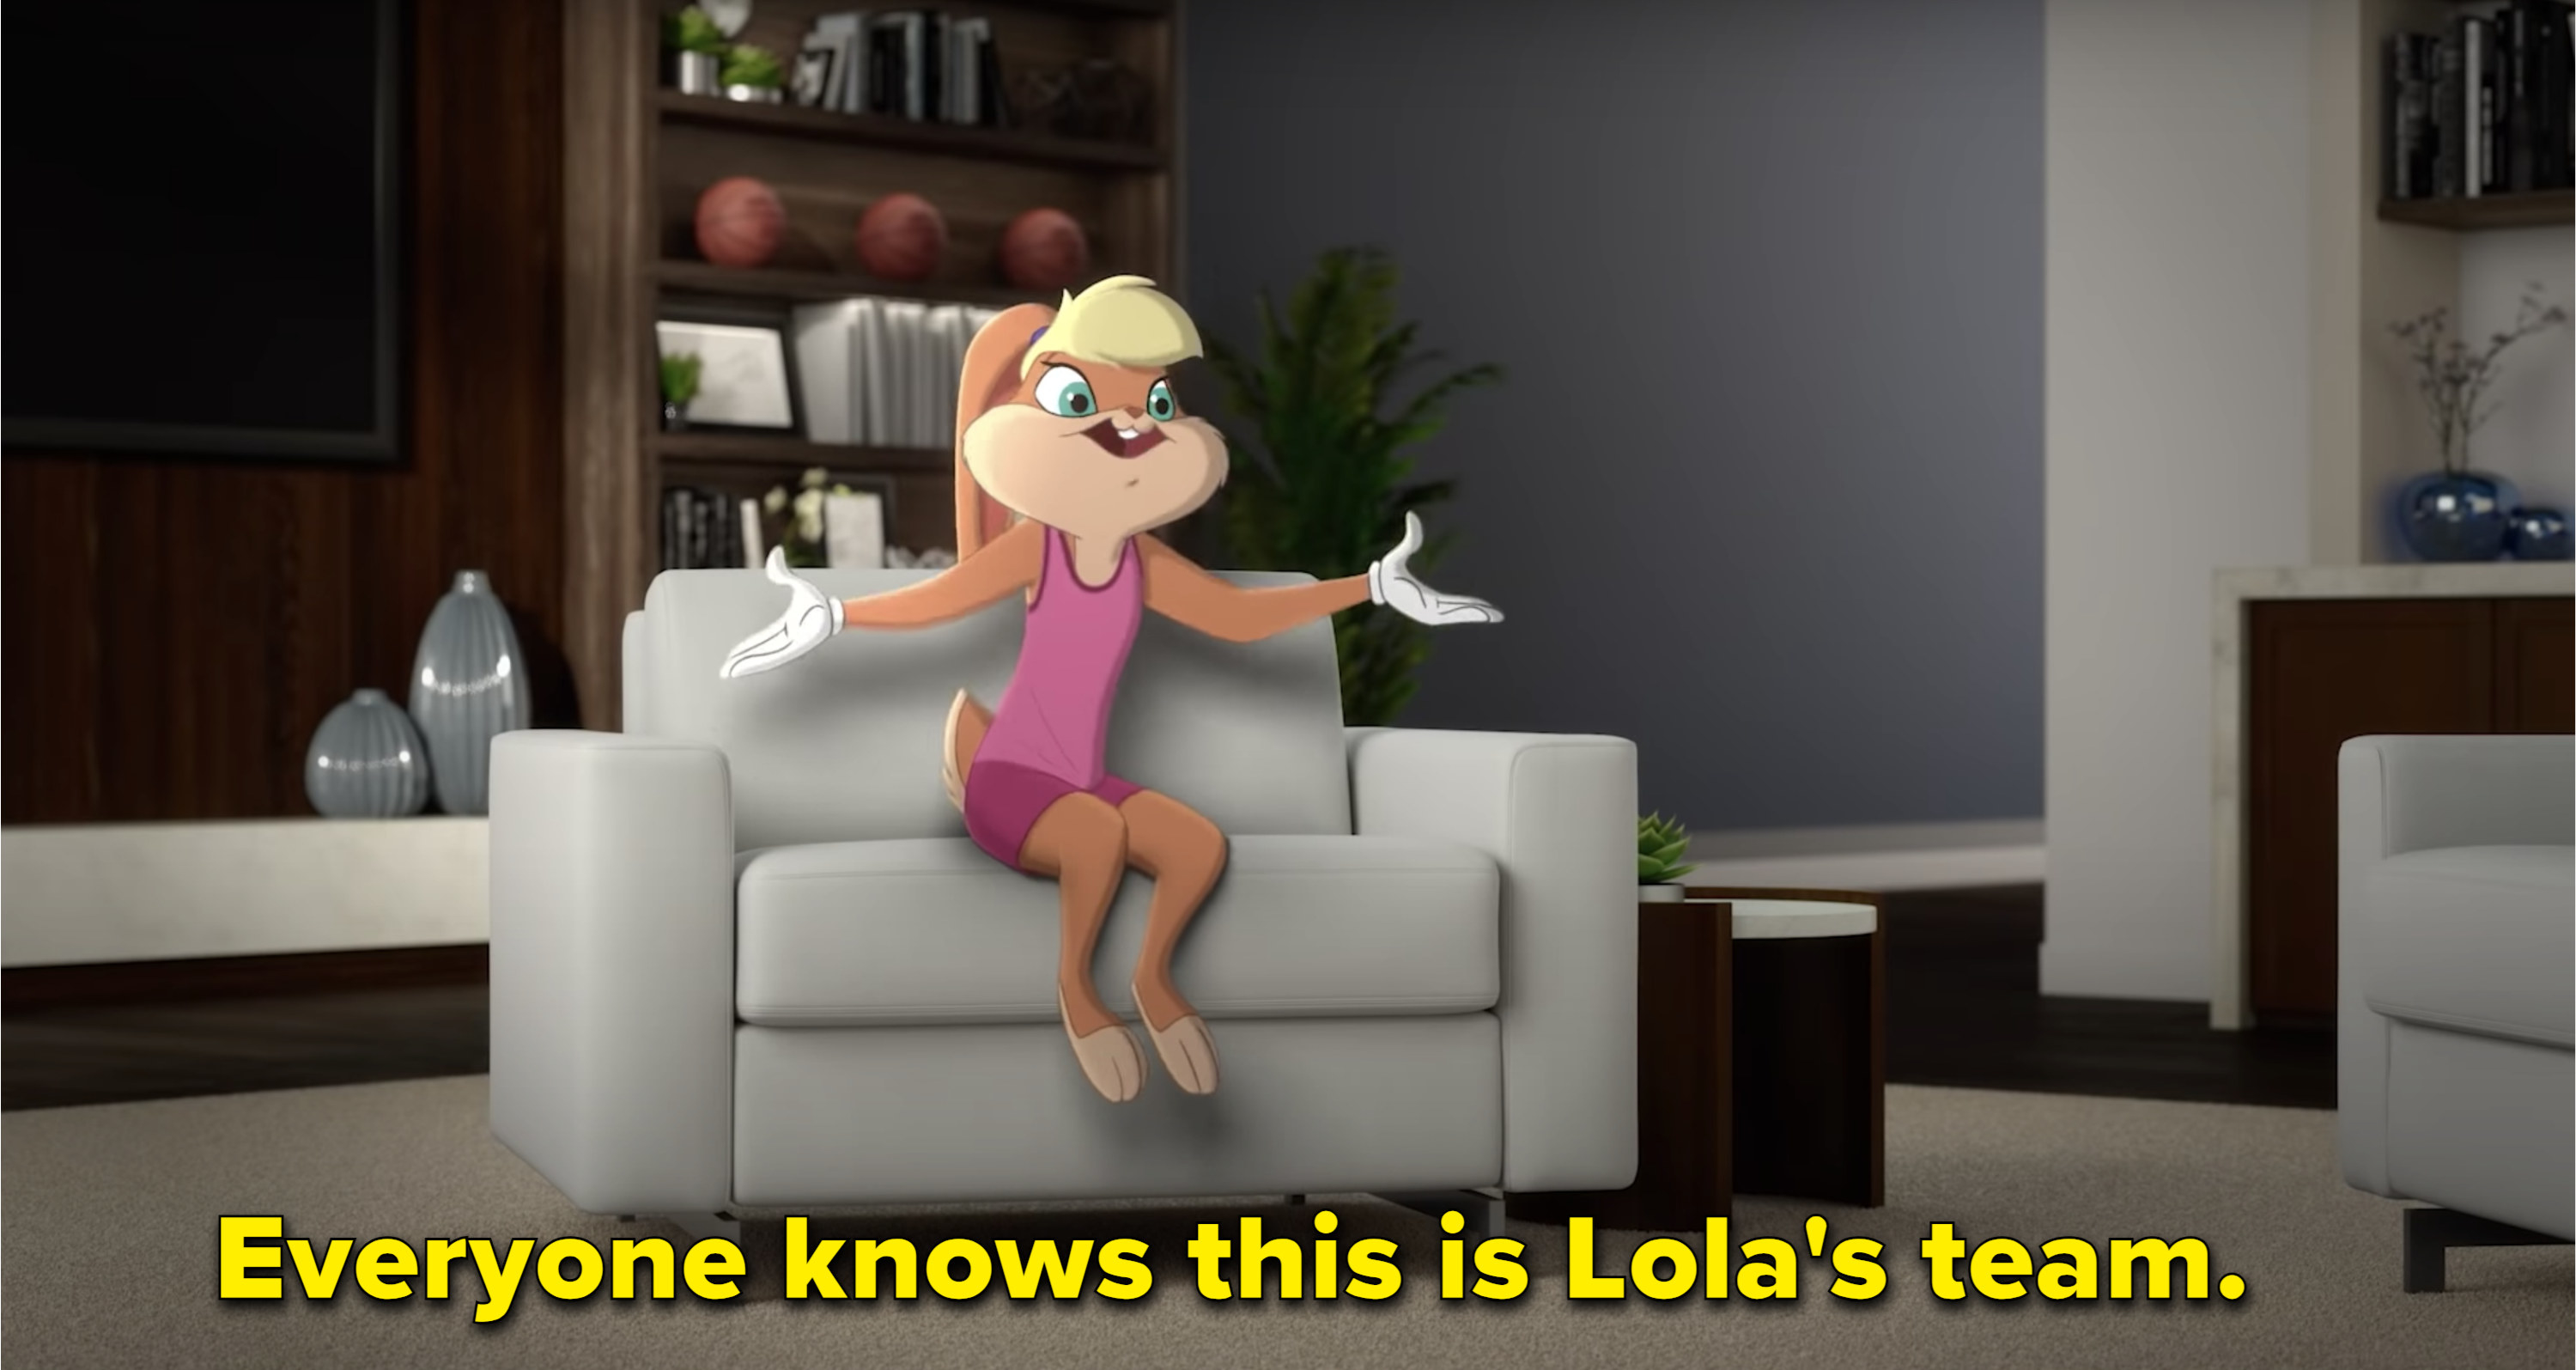 The 2021 Lola Bunny sits on a armchair in a chic room, her arms extended for effect